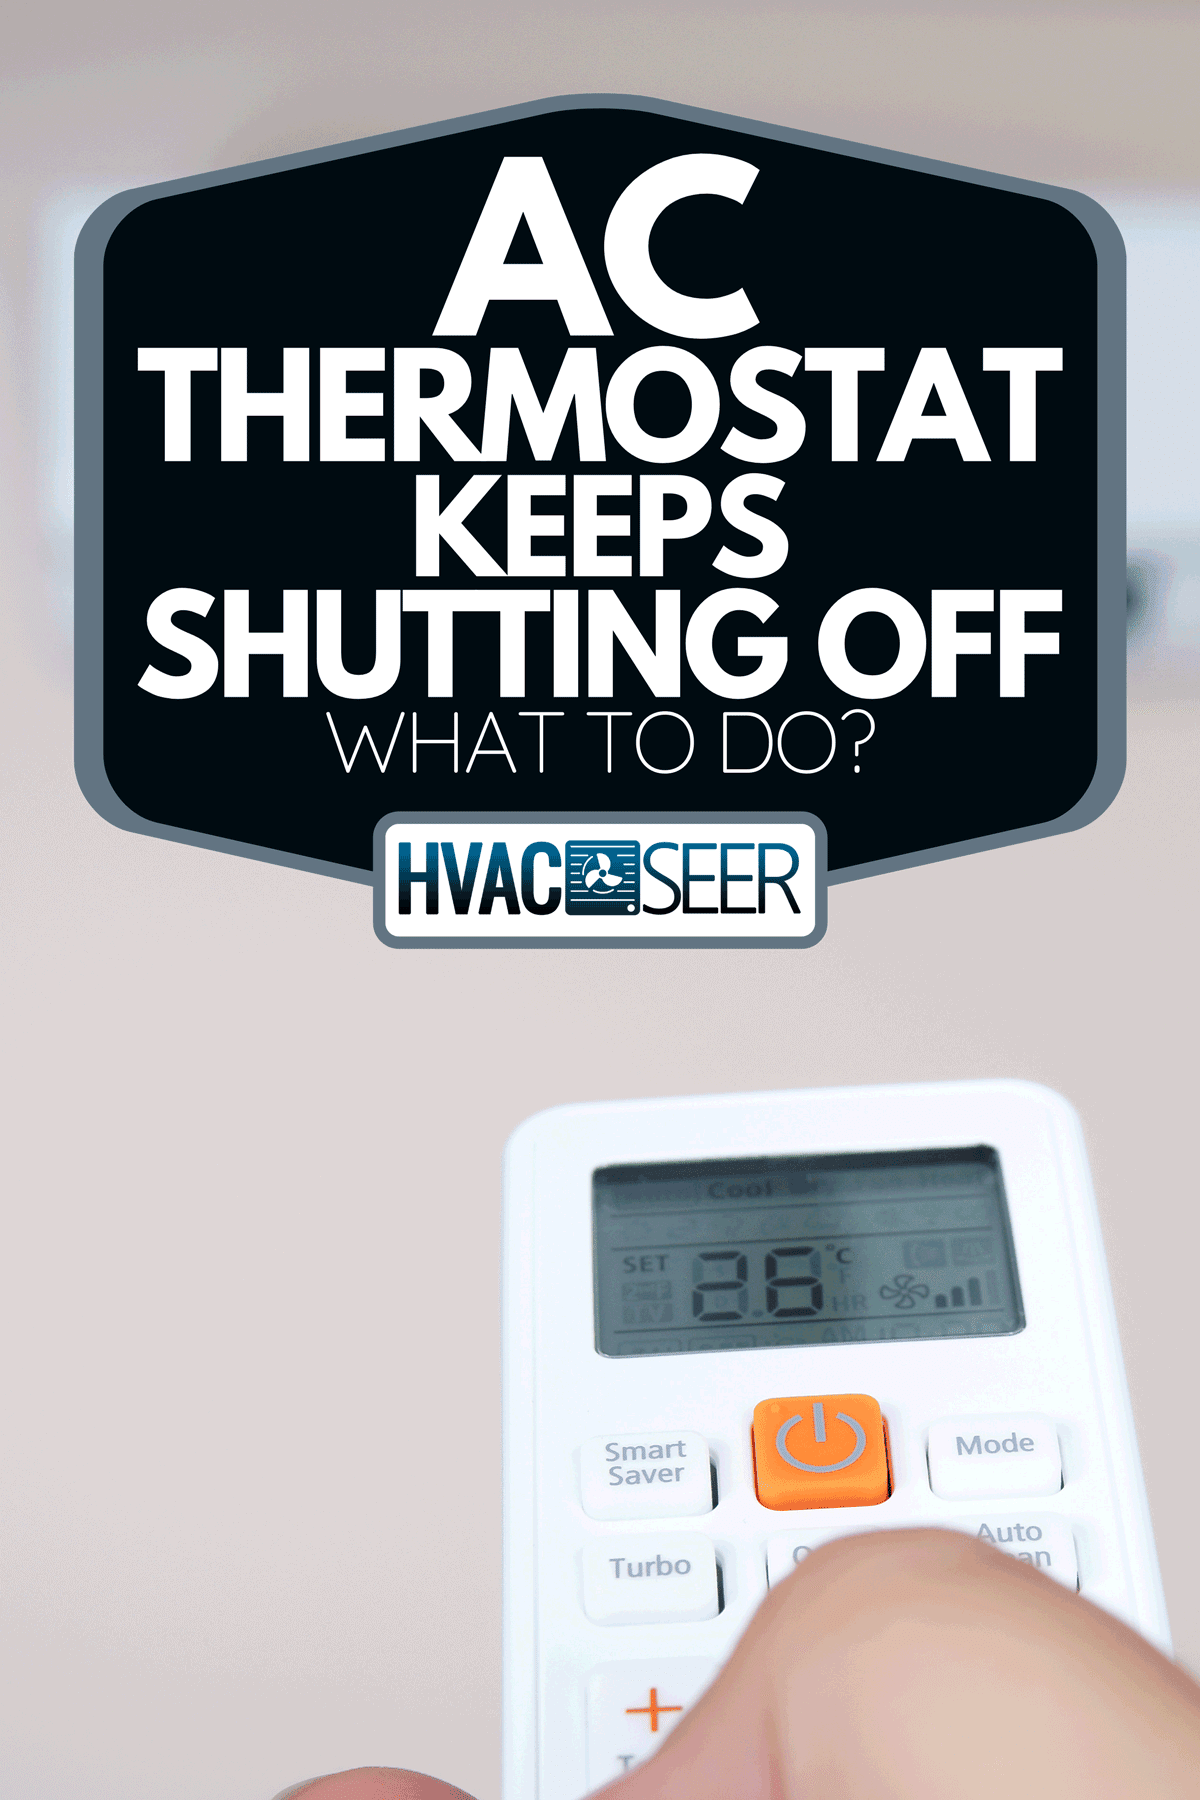 AC Thermostat Keeps Shutting Off — What To Do? - HVACseer.com